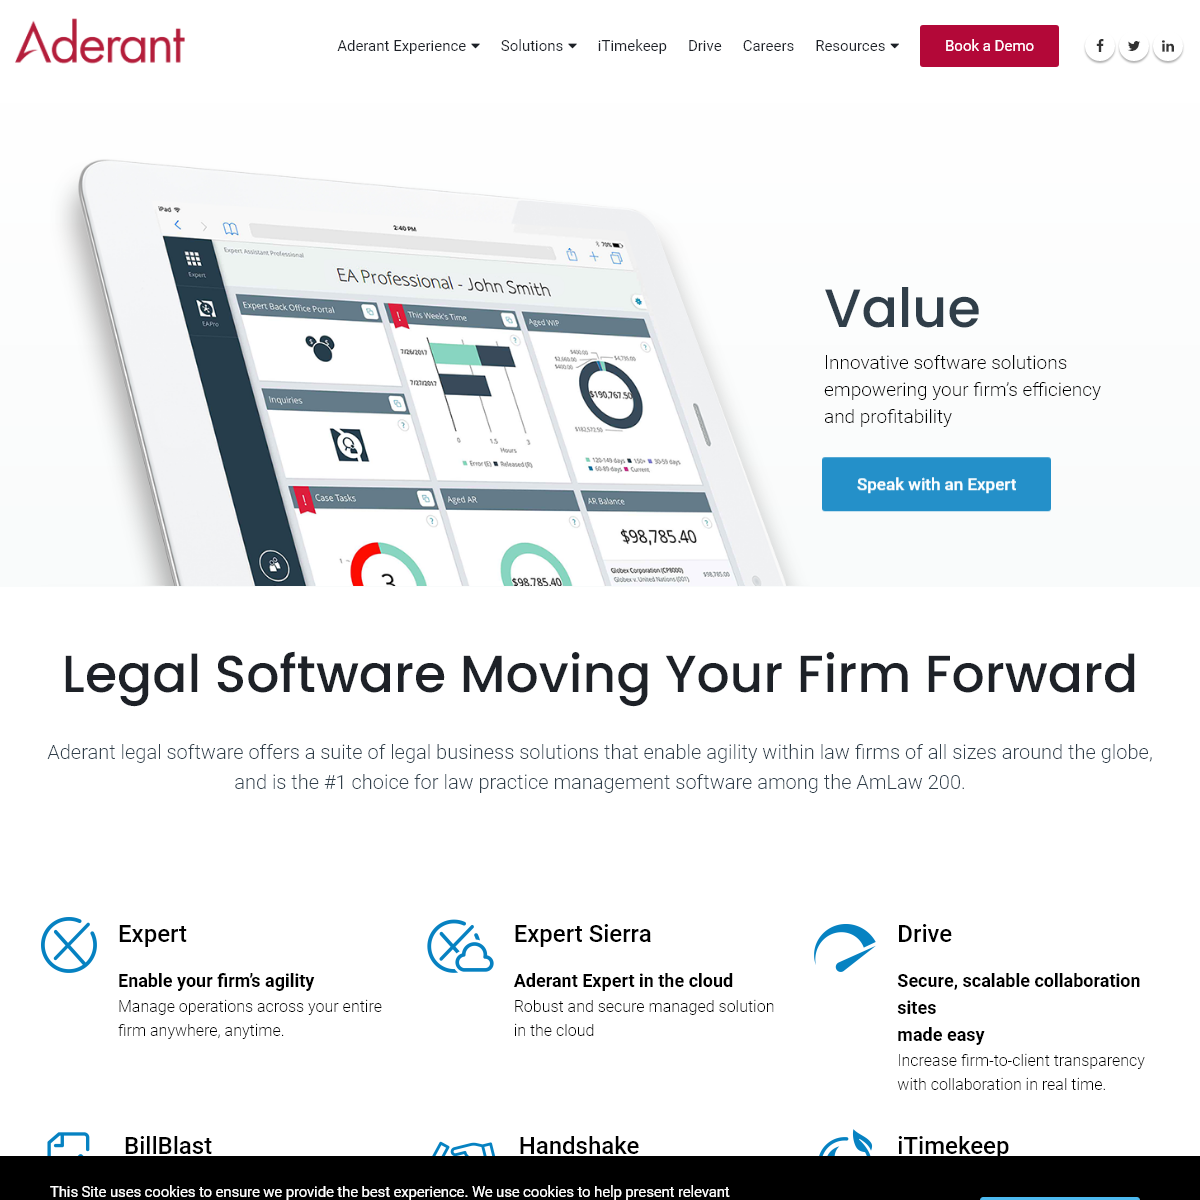 A complete backup of aderant.com